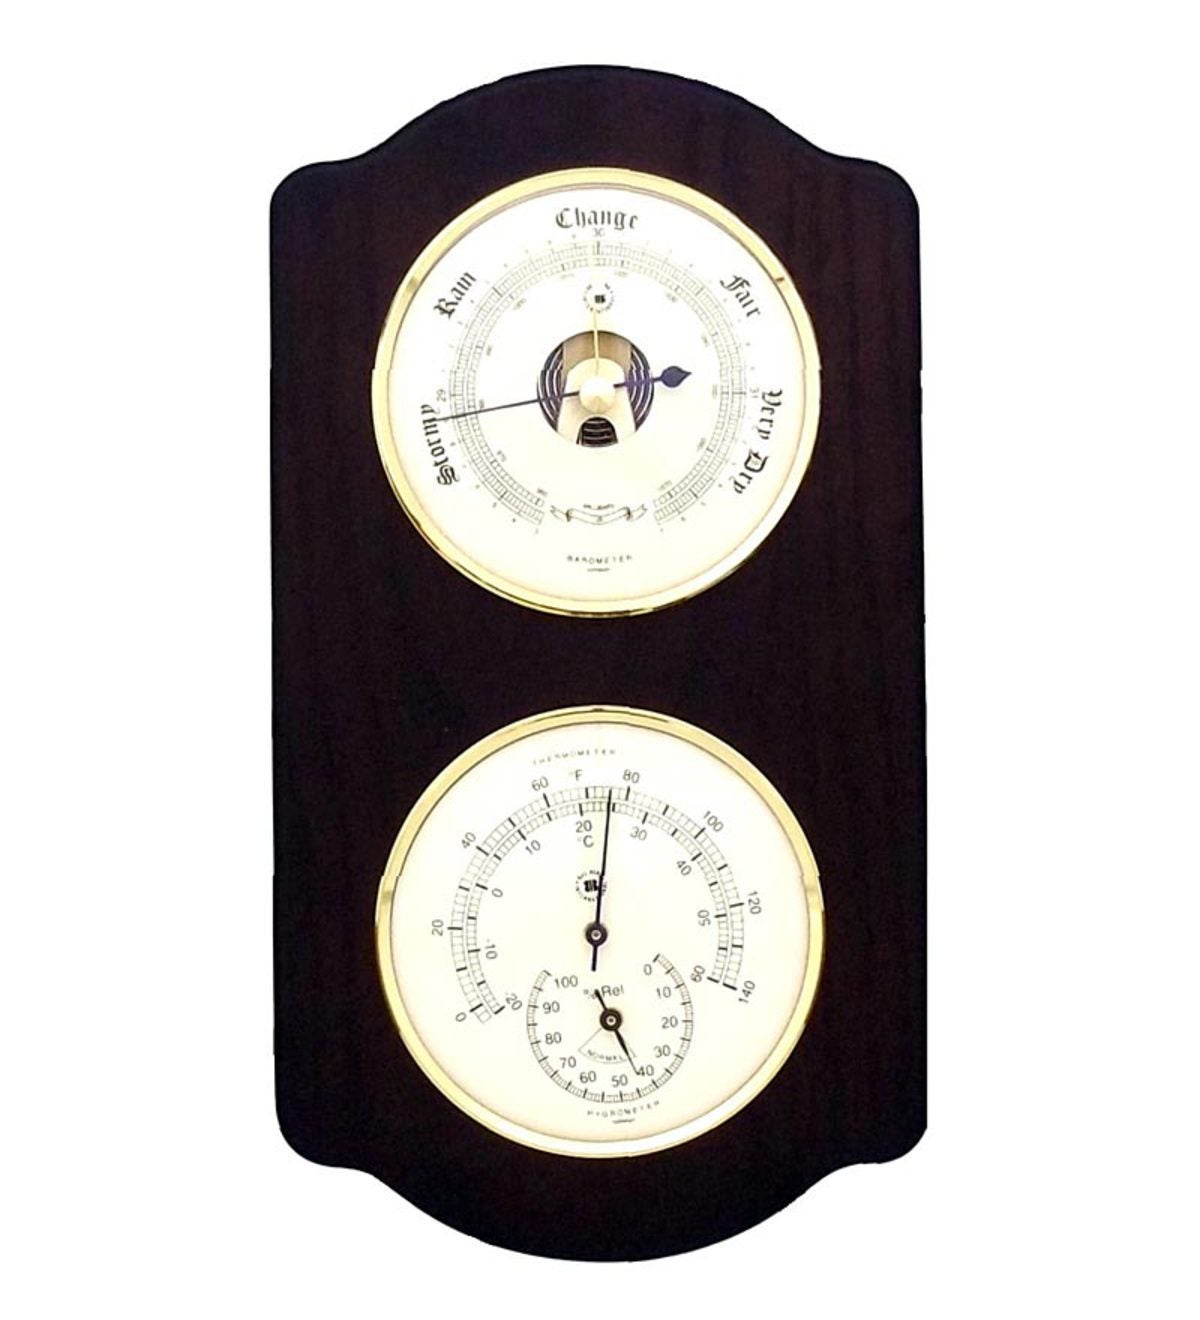  4 Pcs Boat Barometer Clock Thermometer Hygrometer Weather  Station Set Wall Mounting Type Brass for Case for Shell Lightw Hygrometer  with Probe App : Patio, Lawn & Garden